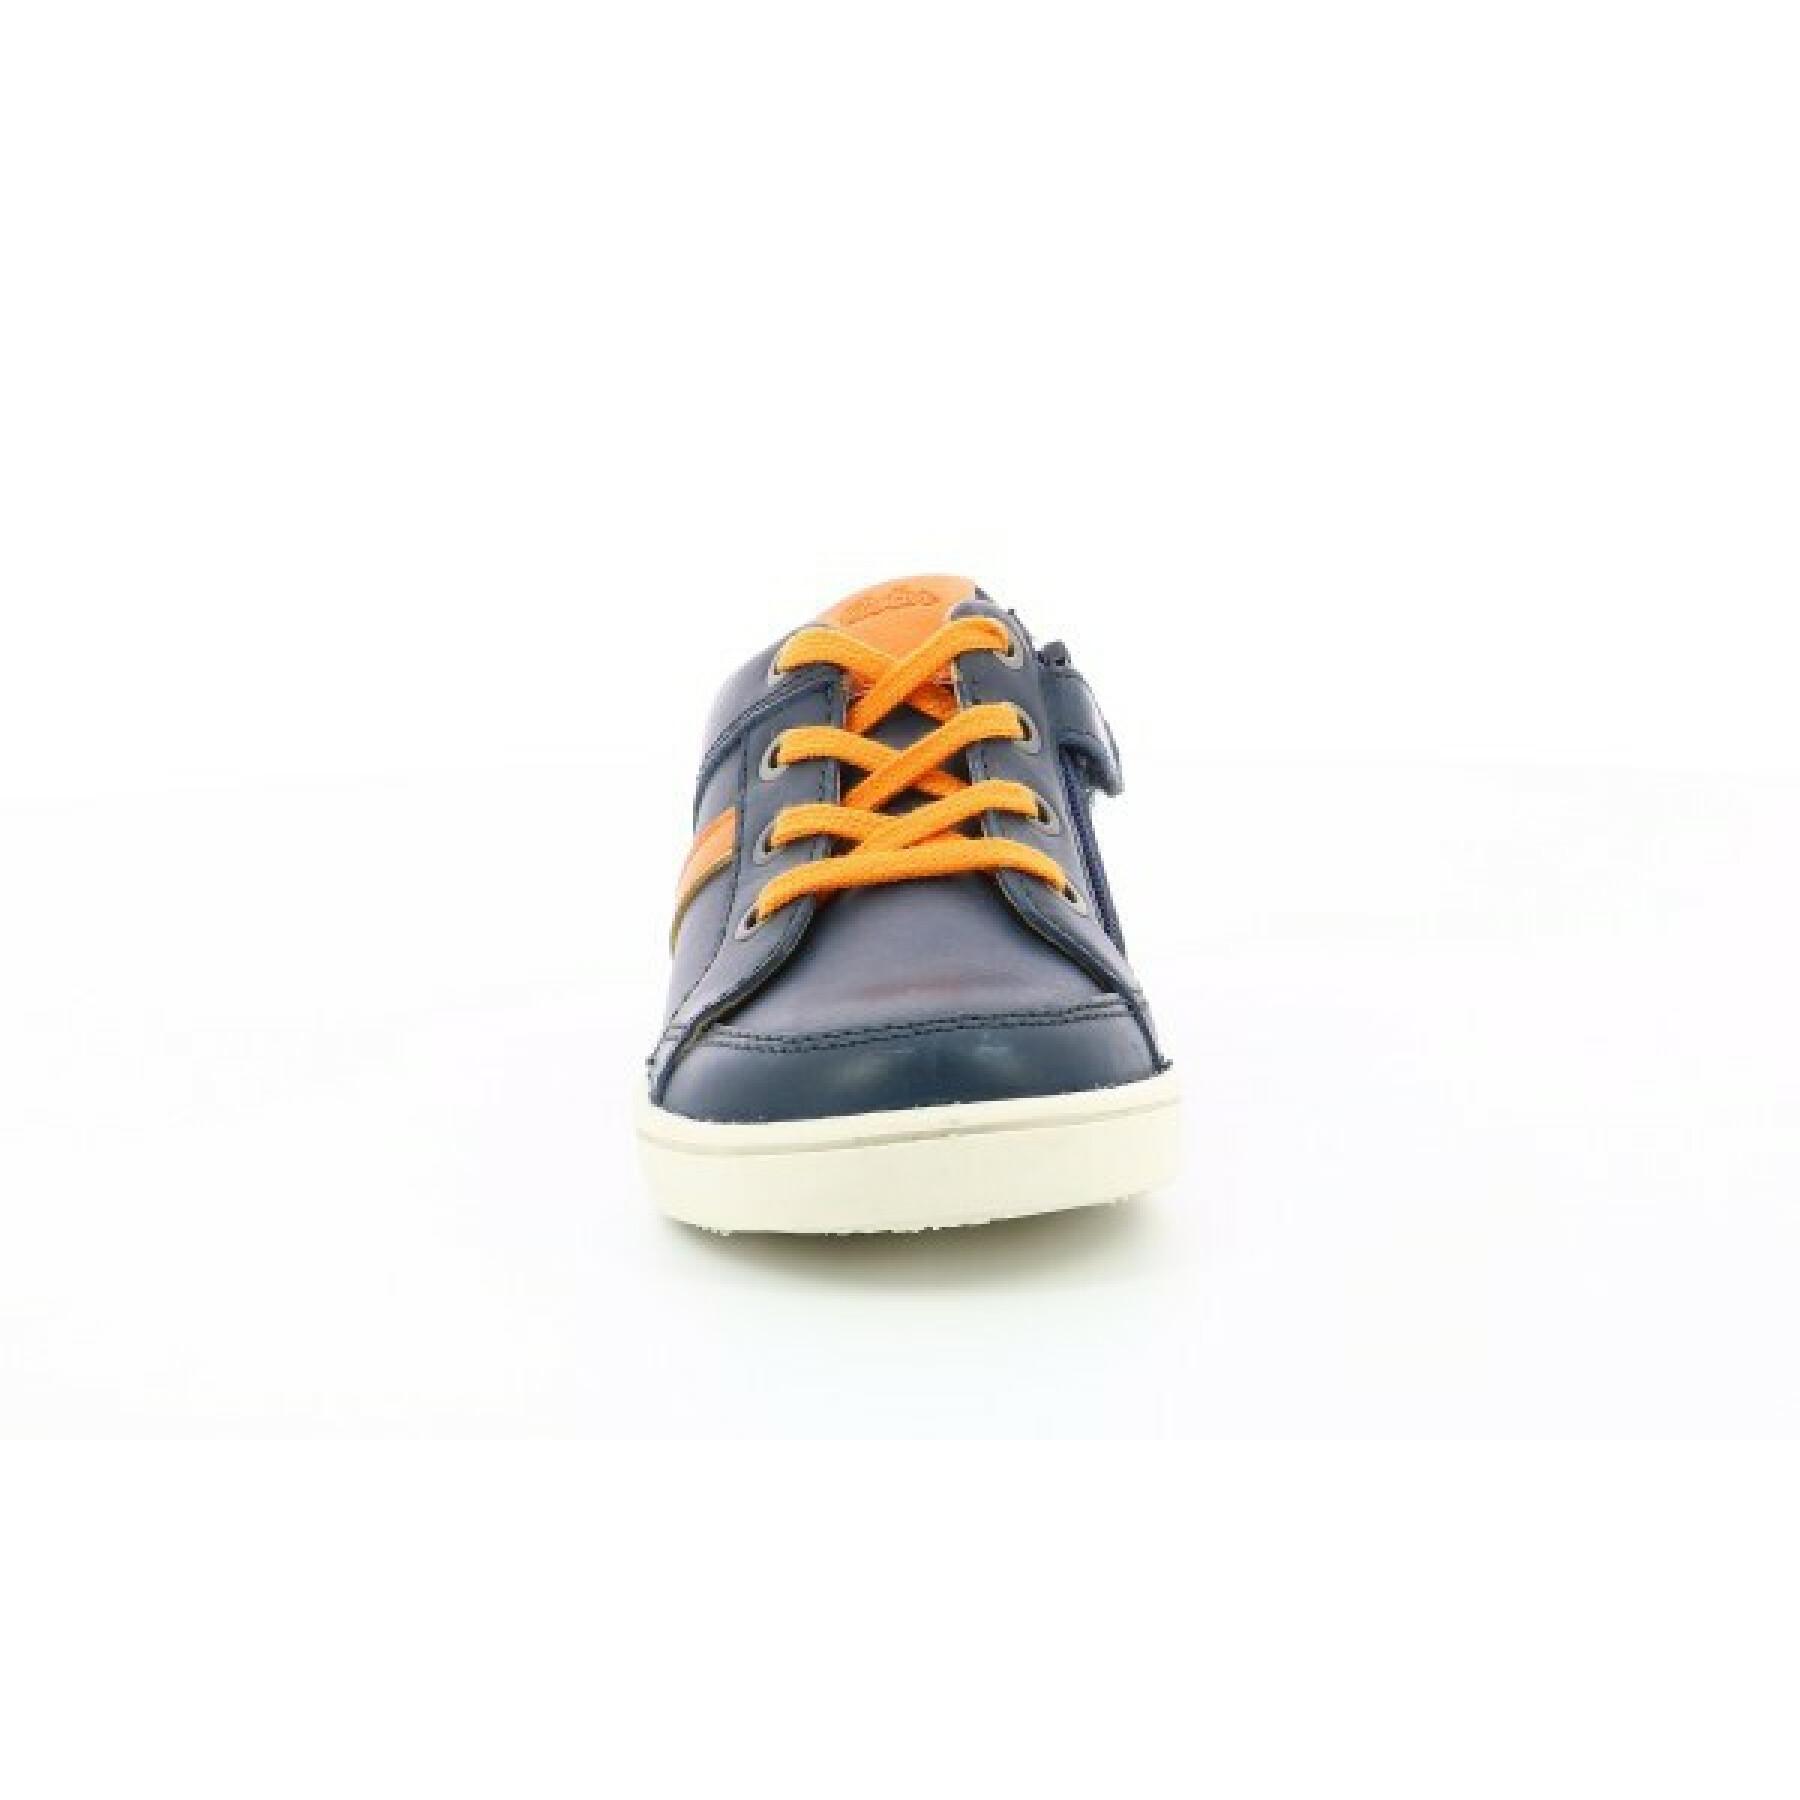 Baby-Sneakers Aster wou